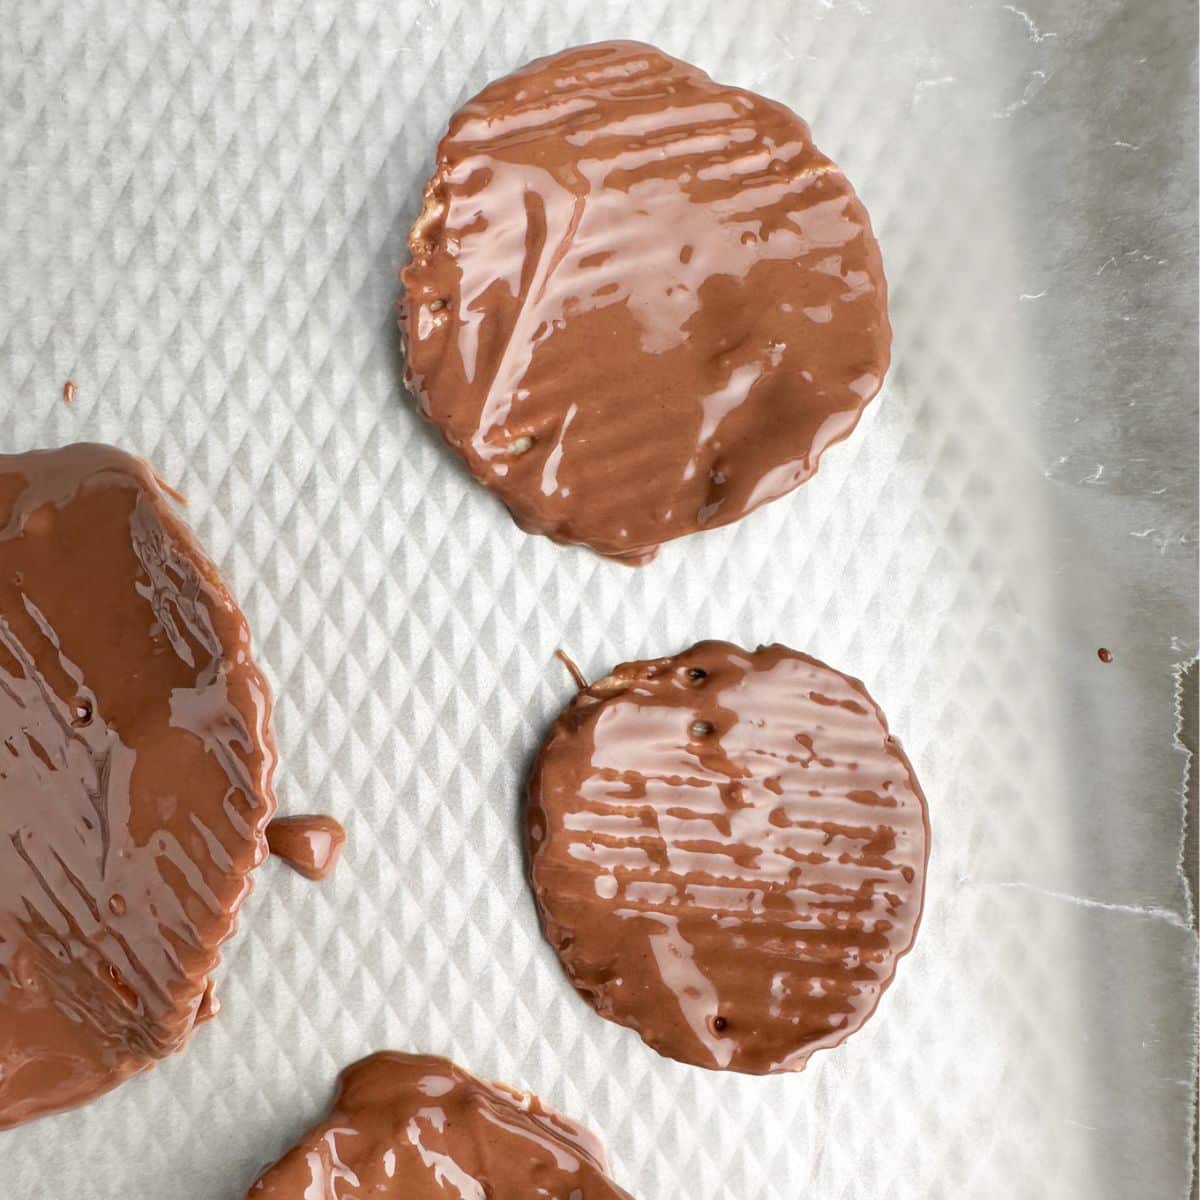 Chocolate covered potato chips on a baking sheet.